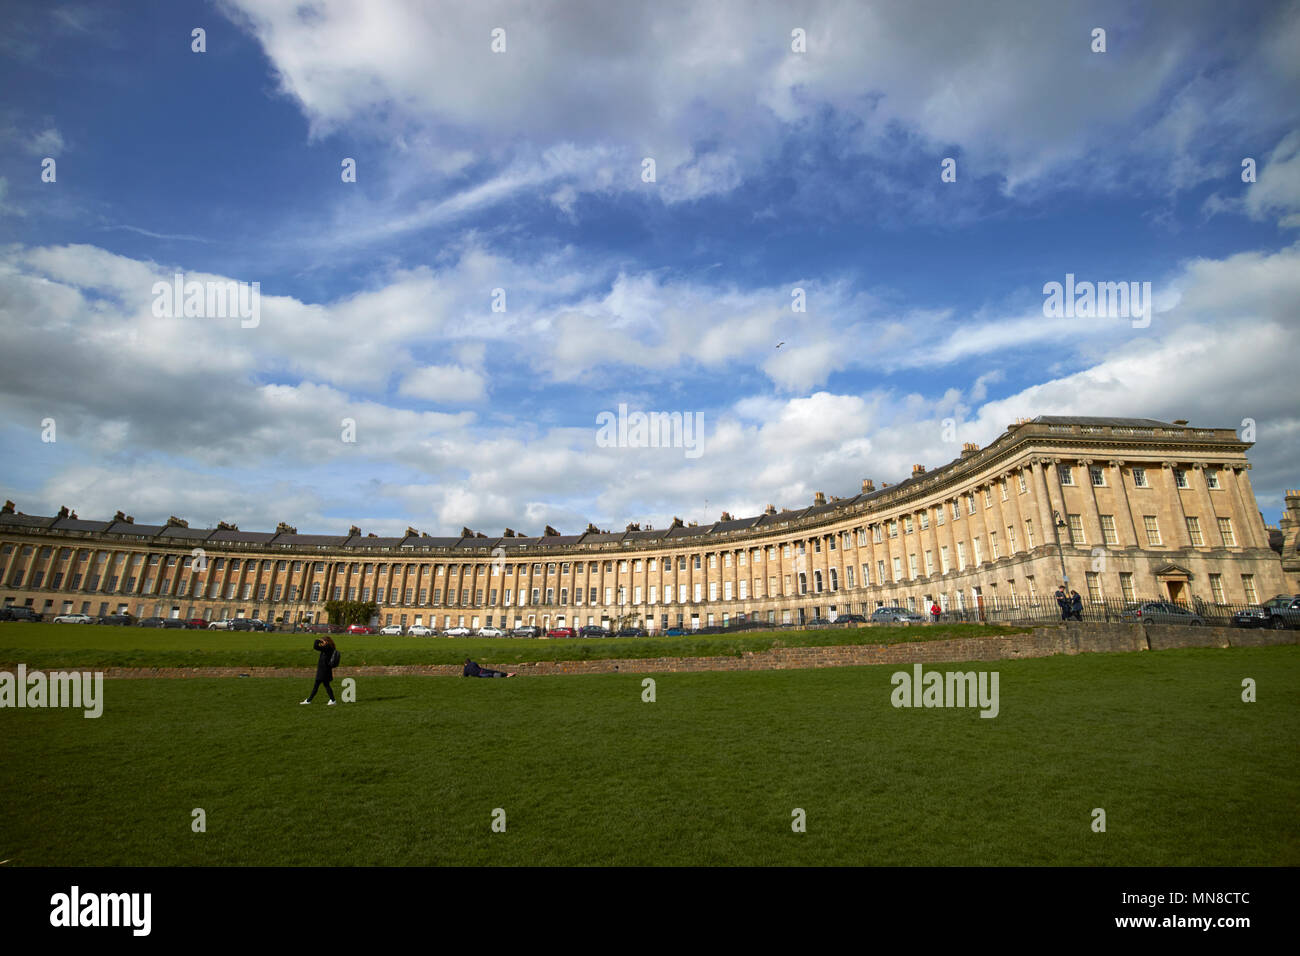 Royal Crescent residential road georgian houses showing ha-ha ditch wall splitting upper and lower lawns Bath England UK Stock Photo